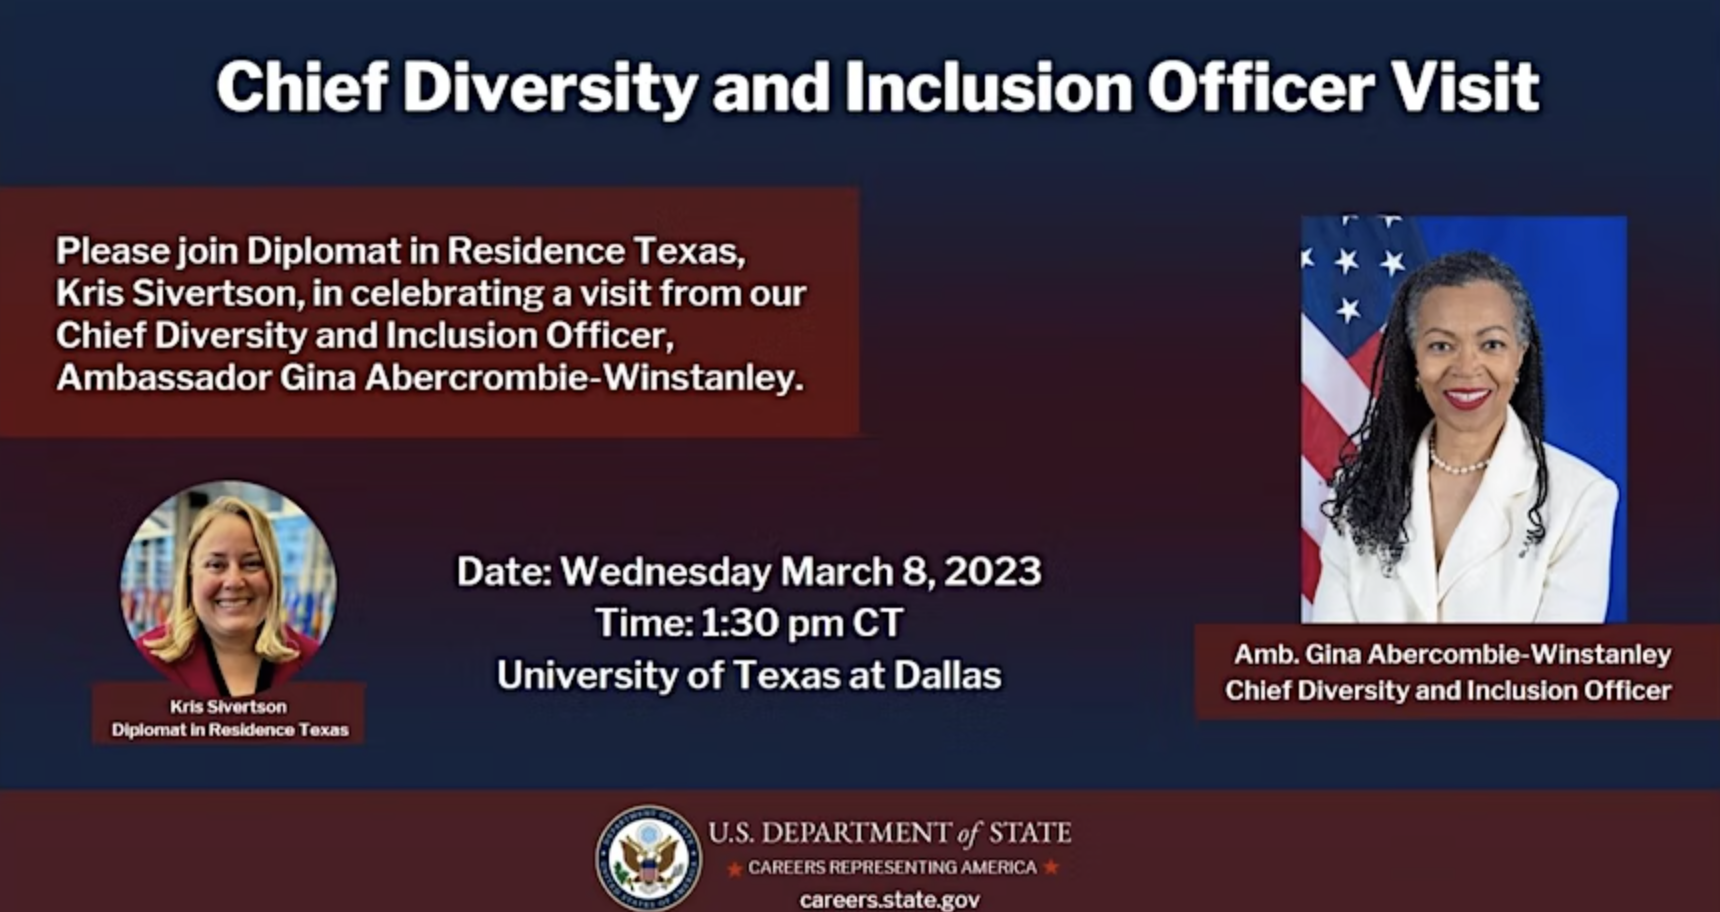 Chief Diversity and Inclusion Officer Visit
Please join Diplomat in Residence Texas, Kris Sivertson, in celebrating a visit from our Chief Diversity and Inclusion Officer, Ambassador GIna Abercrombie-Winstanley
Date: Wednesday, March 8, 2023 Time 1:30 pm CST University of Texas at Dallas